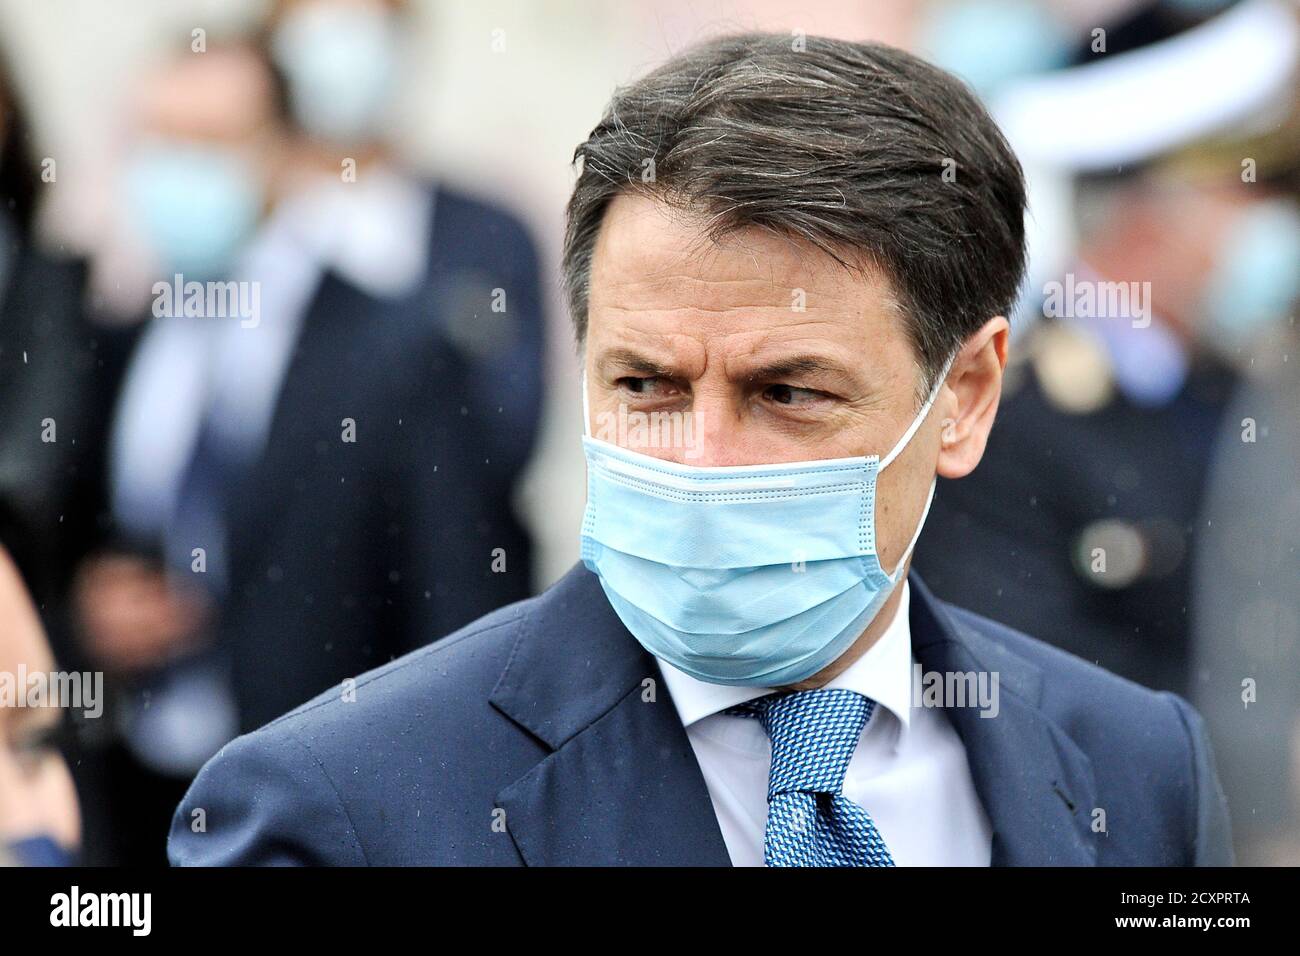 Giuseppe Conte President of the Council of Ministers of the Italian Republic wearing an anti-coronavirus mask, during a visit to the 'Francesco Gesuè' school in the city of San Felice A Cancello (CE), Italy on October 1, 2020. (Photo by Vincenzo Izzo/Sipa USA) Credit: Sipa USA/Alamy Live News Stock Photo